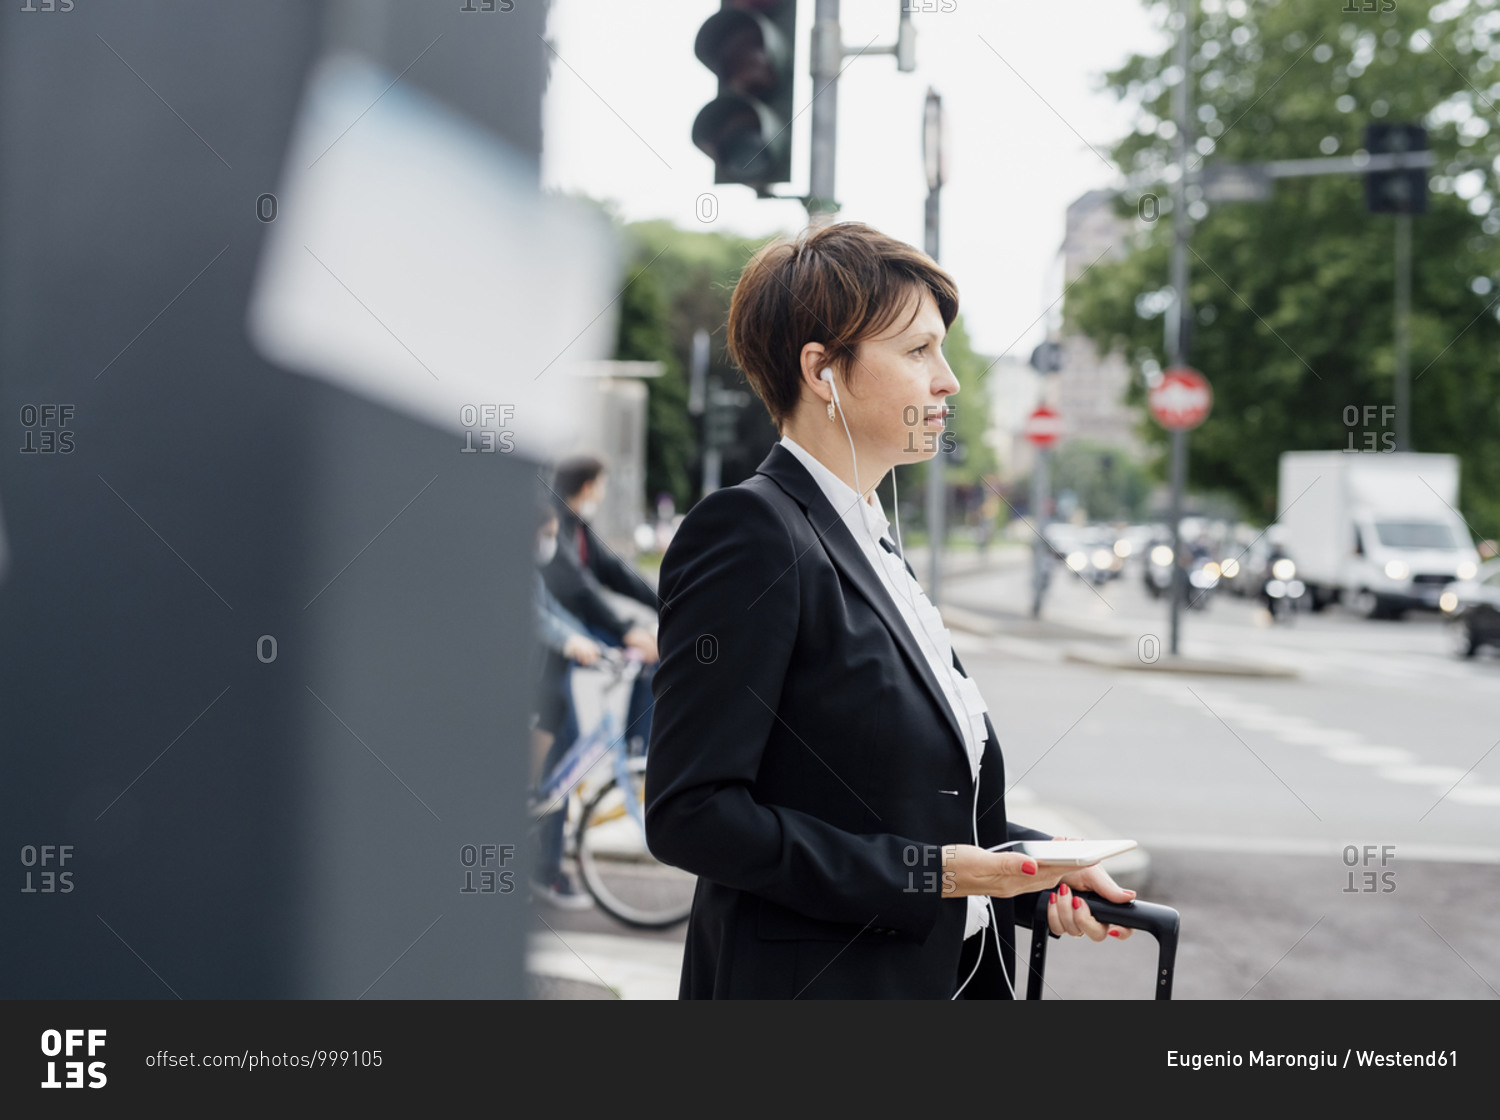 Businesswoman listening music through headphones looking away while standing on street in city